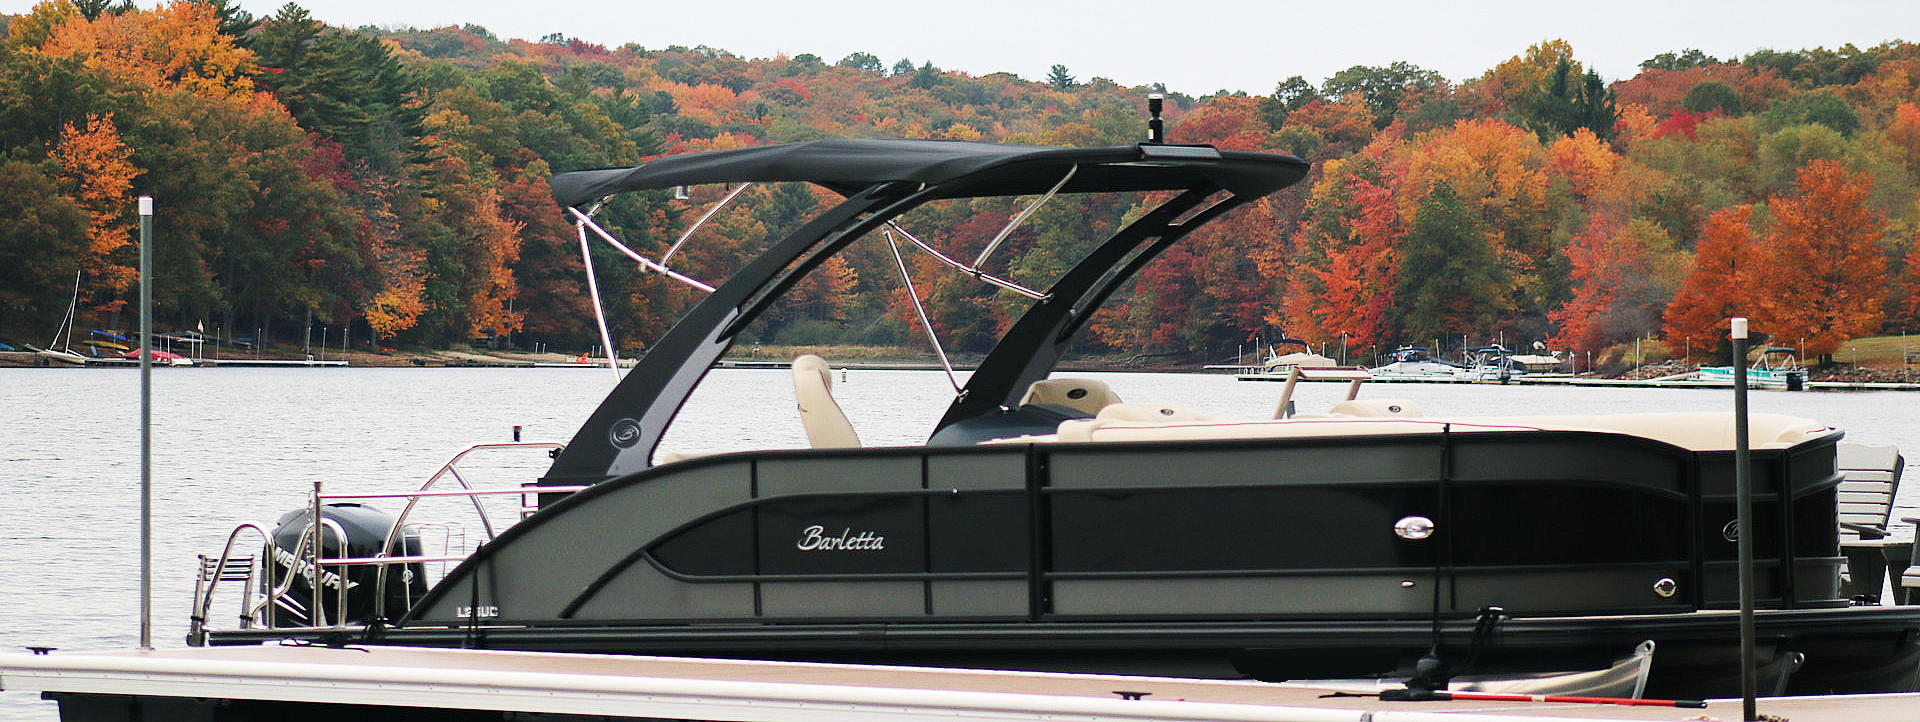 Tips for Cool Weather Boating